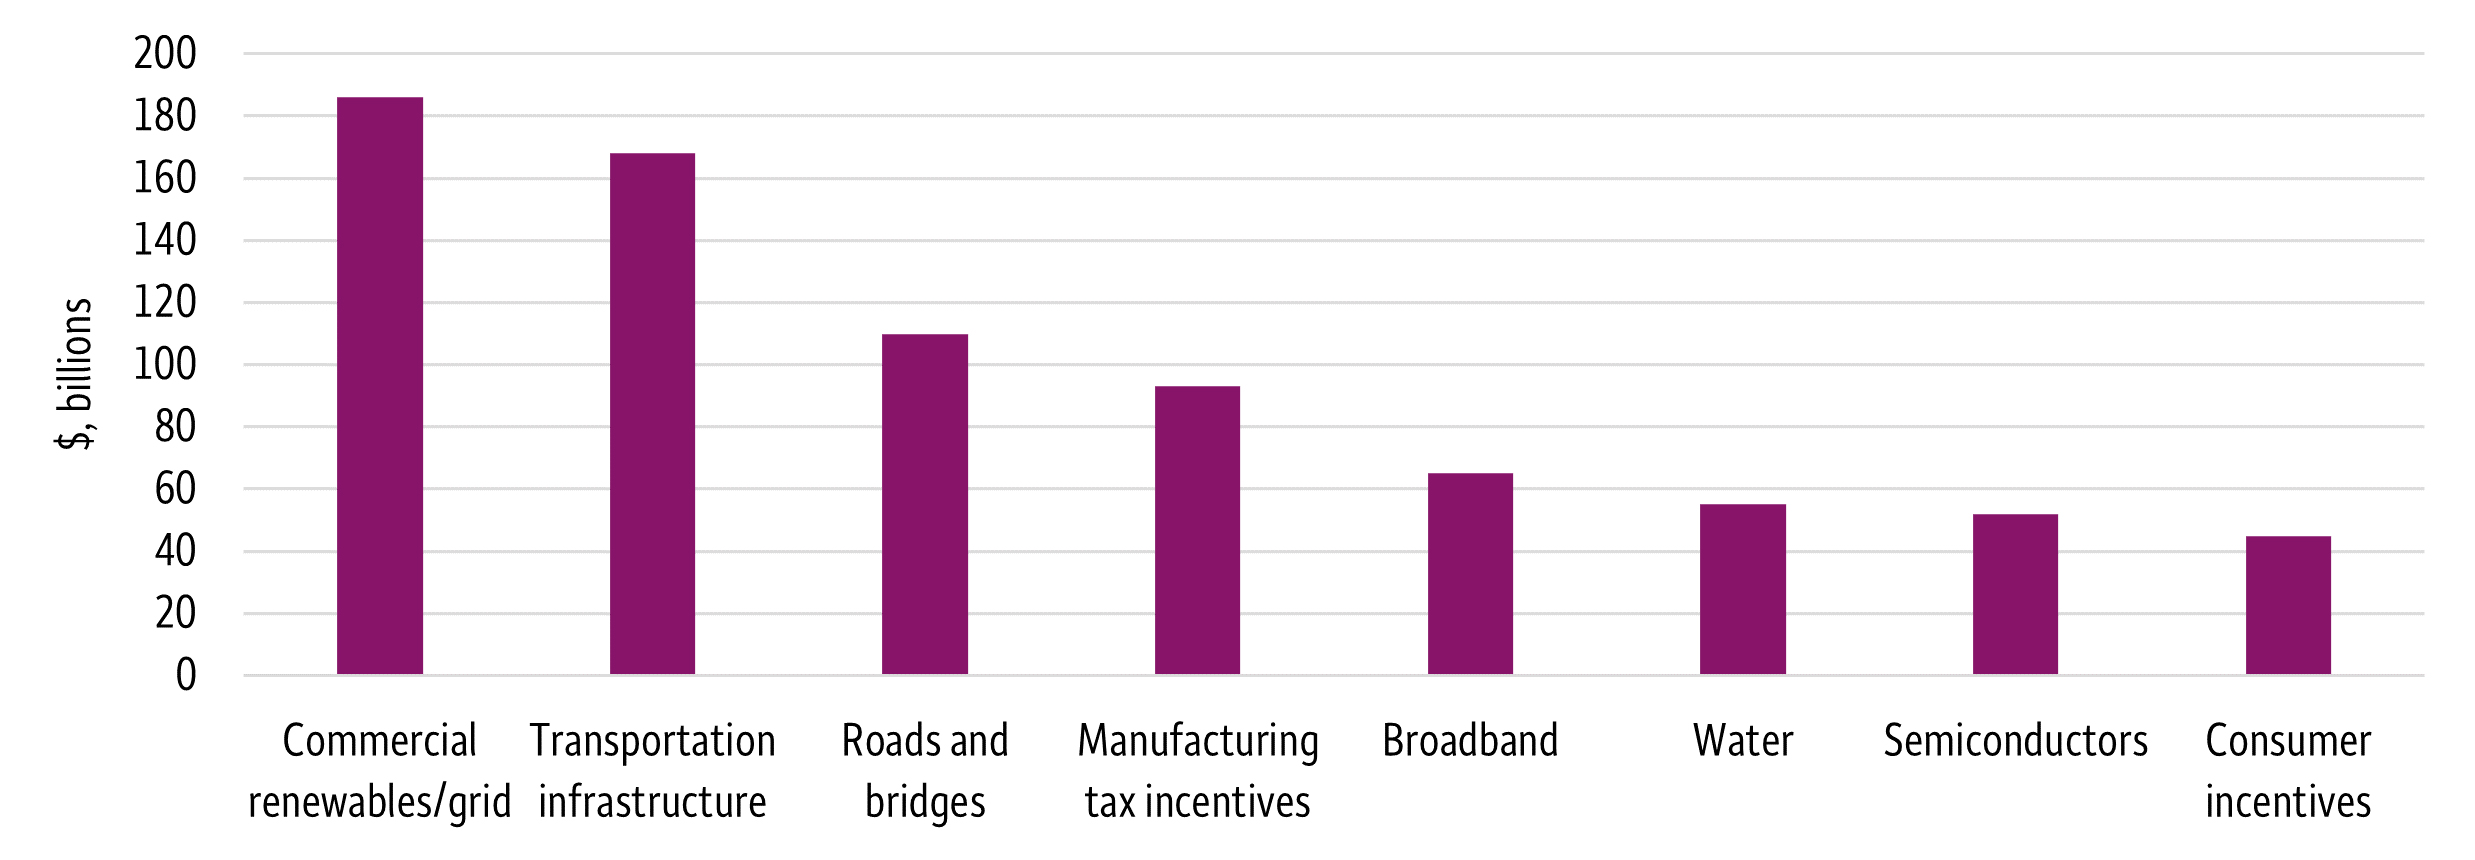 This chart depicts eight broadly defined areas of spending allocated by the IRA, IIJA, and CHIPS bills. Commercial Renewables/Grid: $186 billion; Transportation Infrastructure: $168 billion; Roads and Bridges: $110 billion; Manufacturing Tax Incentives: $93 billion; Broadband: $65 billion; Water: $55 billion; Semiconductors: $52 billion; Consumer Incentives: $45 billion.